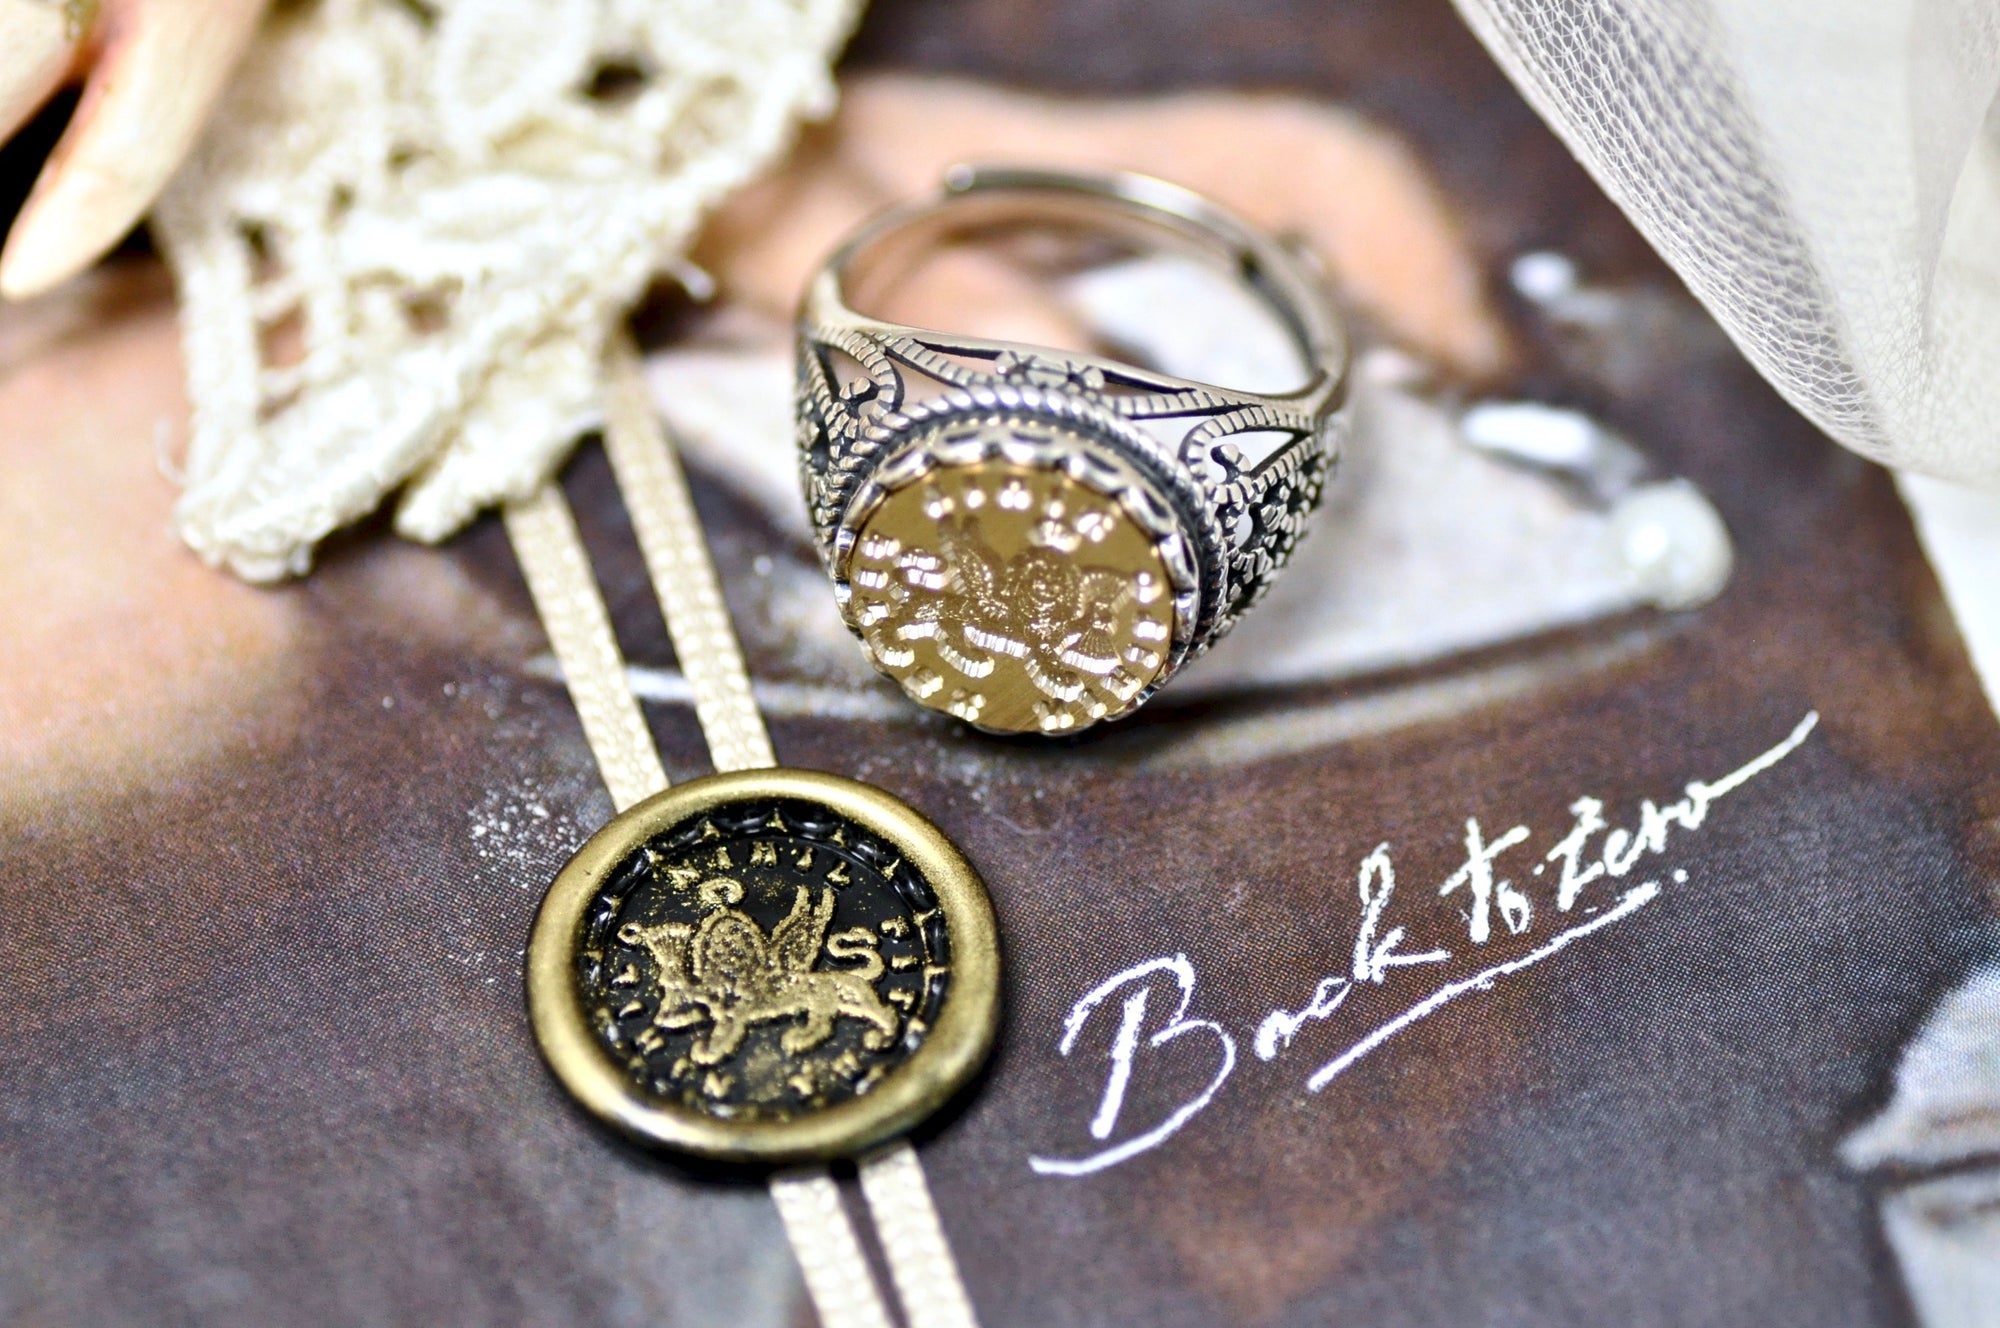 Winged Lion Latin Motto Lace Signet Ring